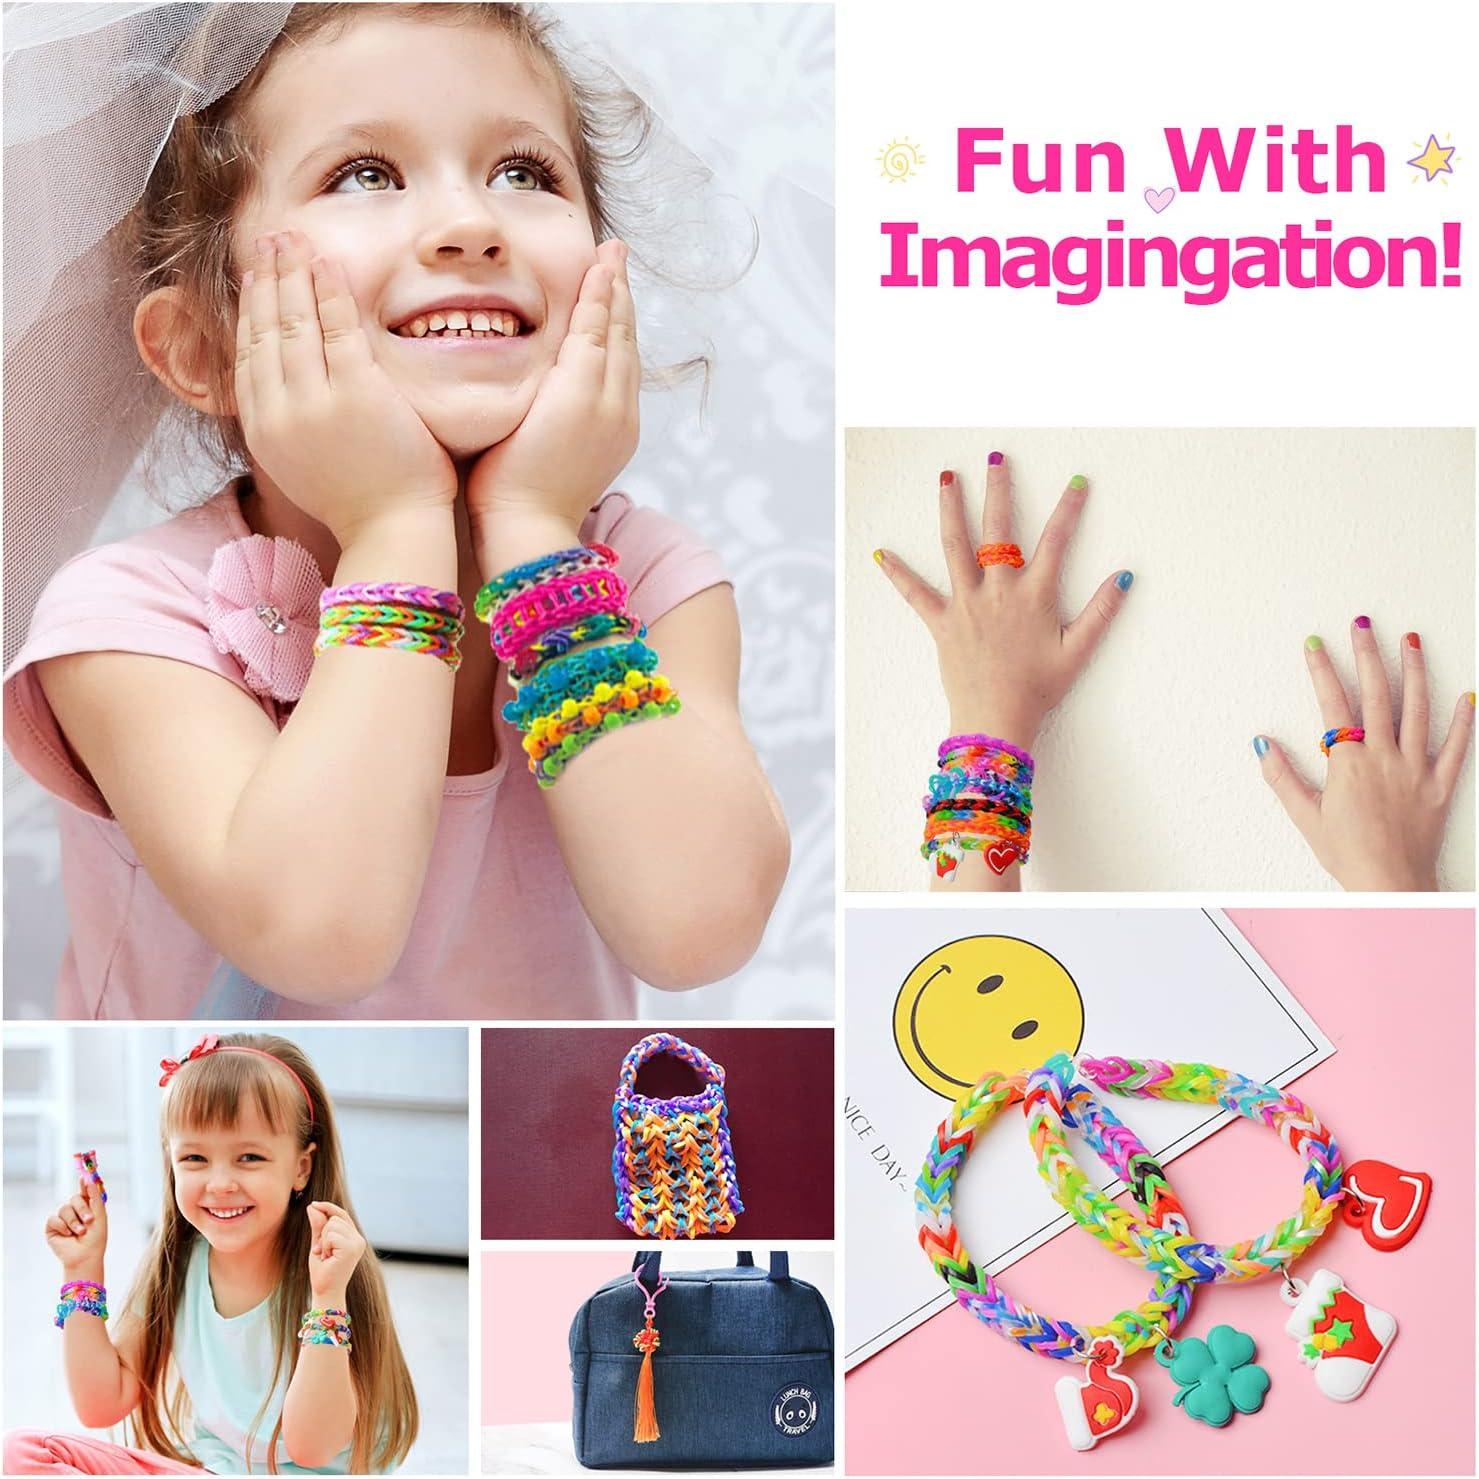 Loom Rubber Band Bracelets kit for Girls, Boys - 1500 + DIY Colored Rubber  Bands, Skin-Friendly - Birthday, Friendship Gift for Anyone.